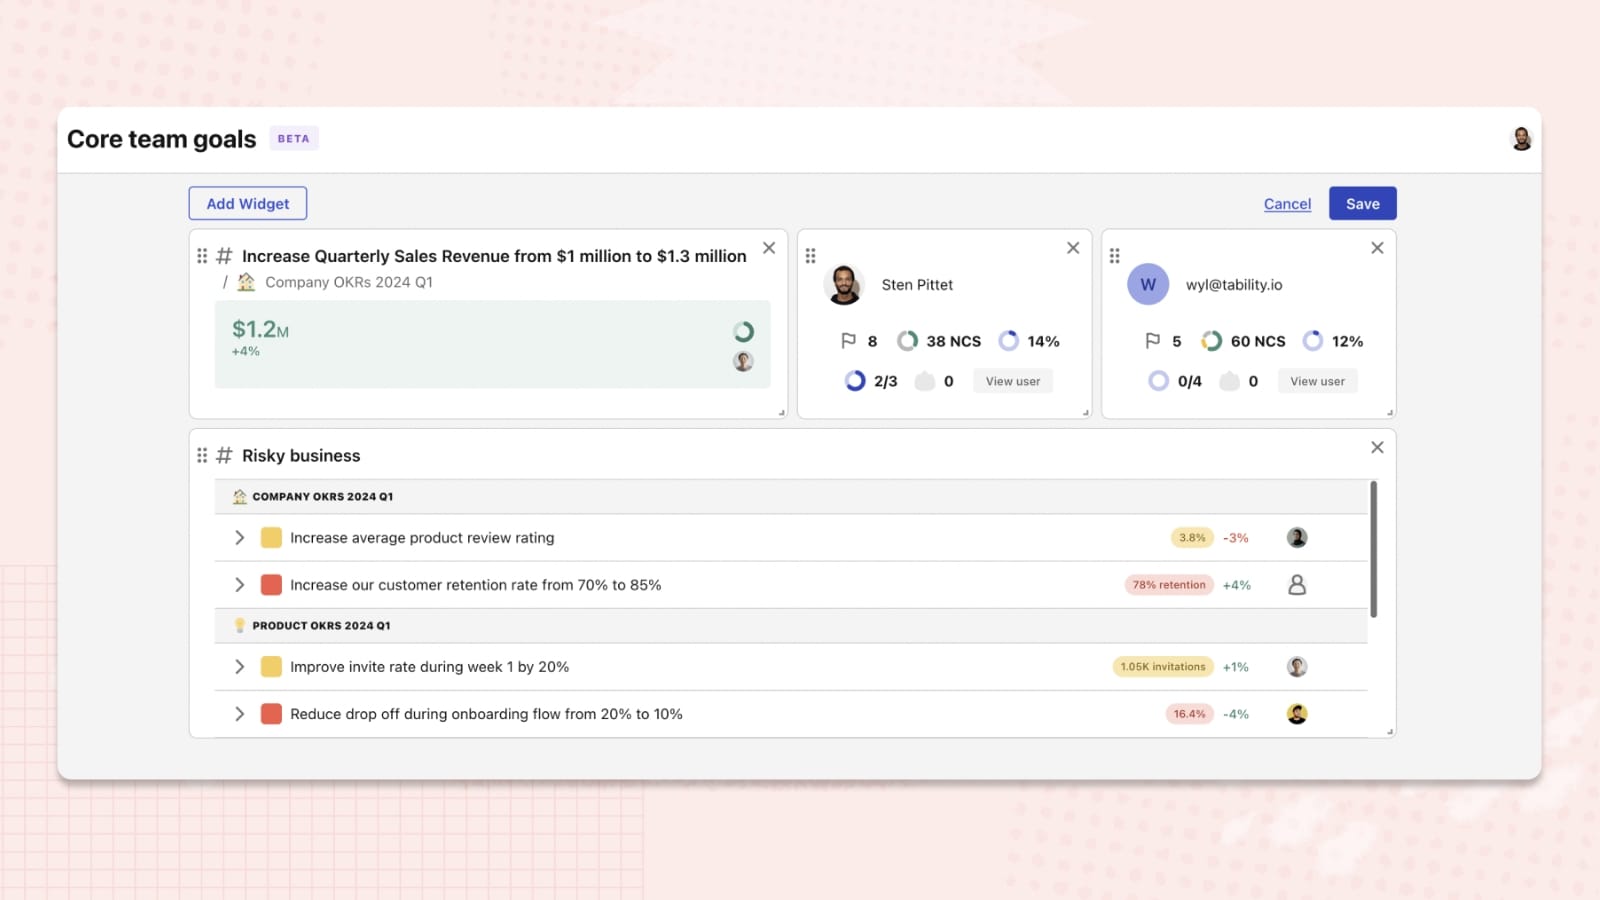 We're done. How about you build your own OKR dashboard?